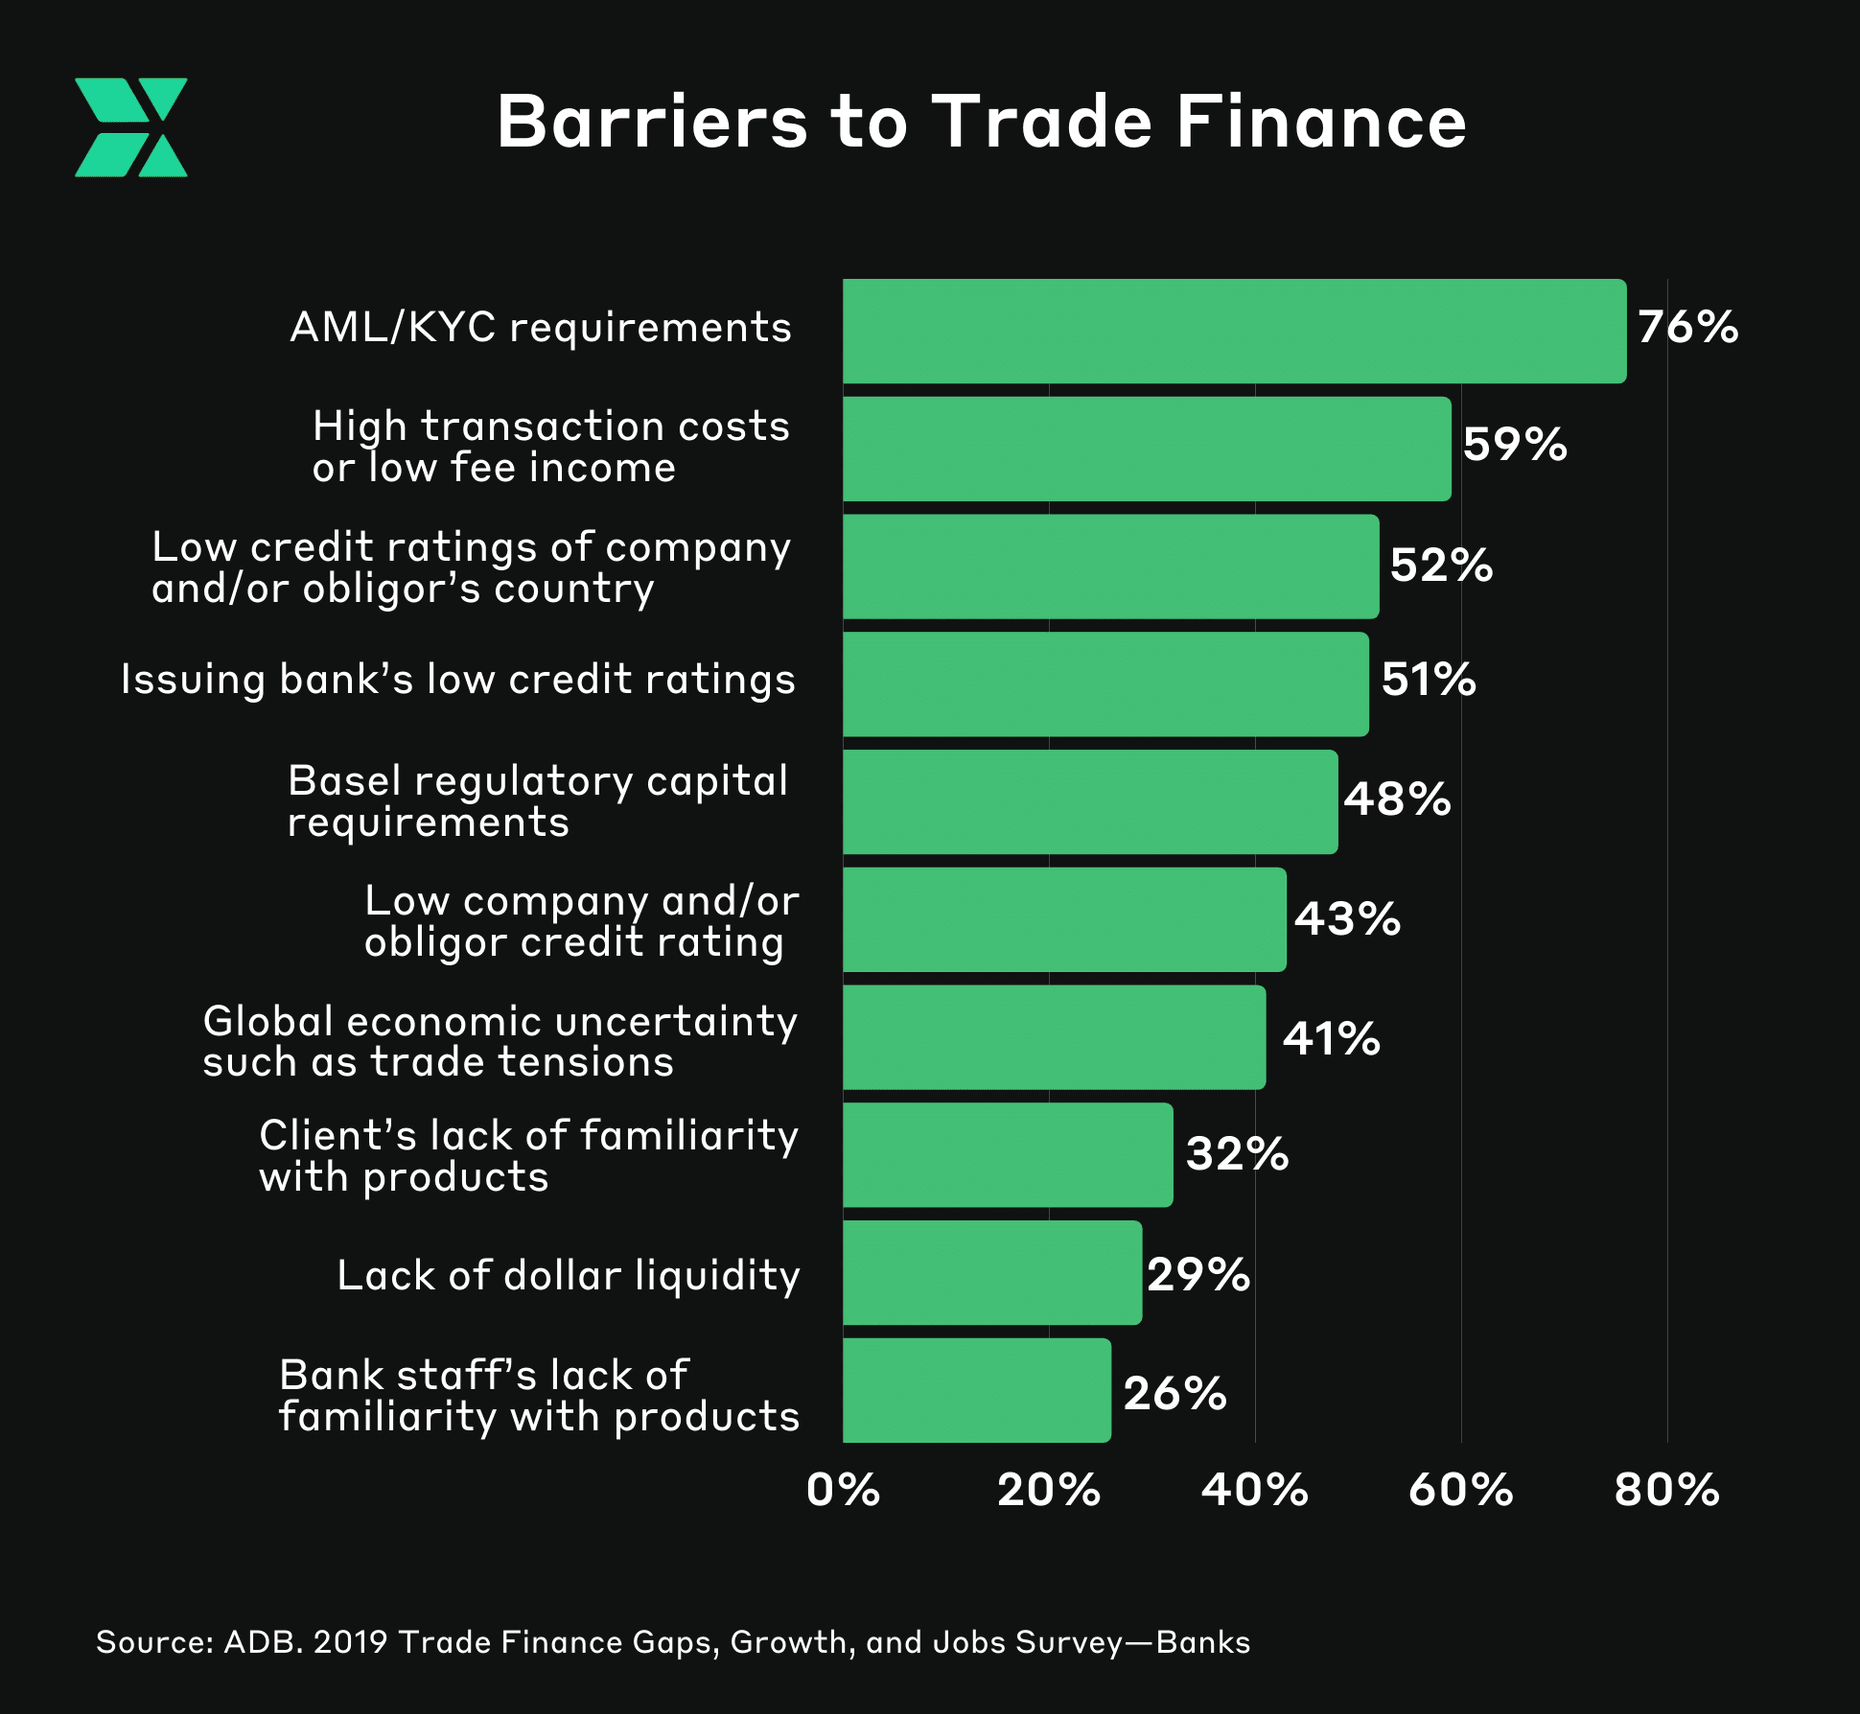 Barriers to Trade Finance